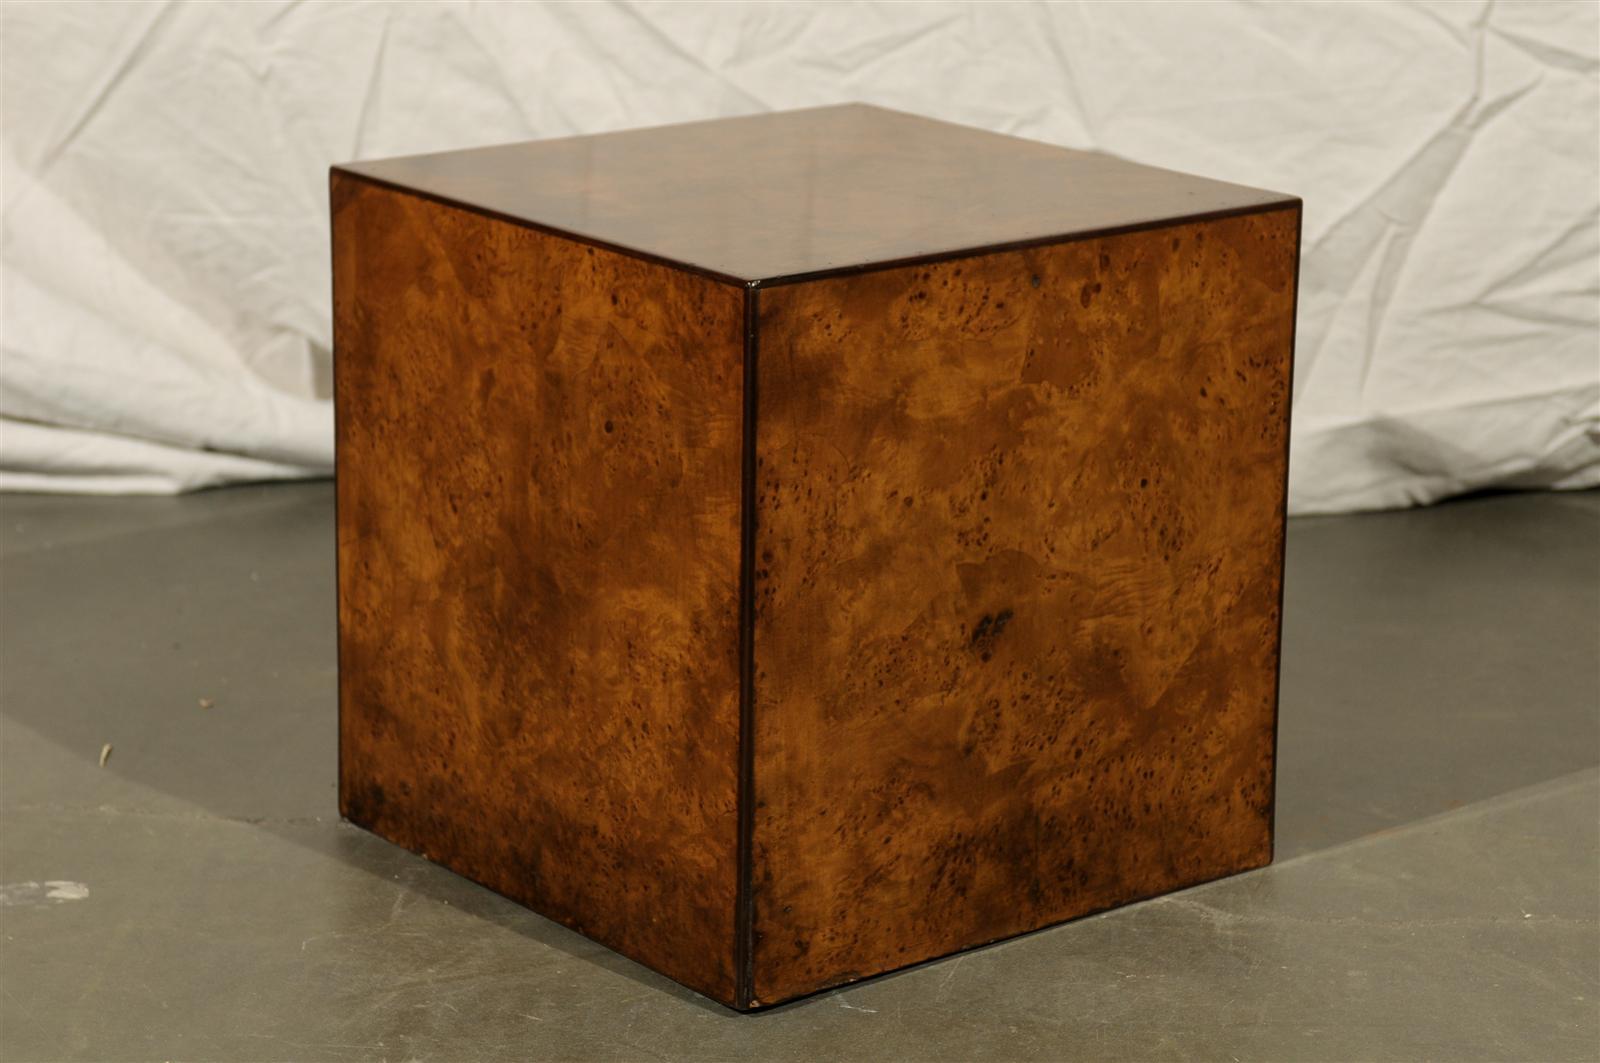 Burled olivewood cube side table, circa 1970s.